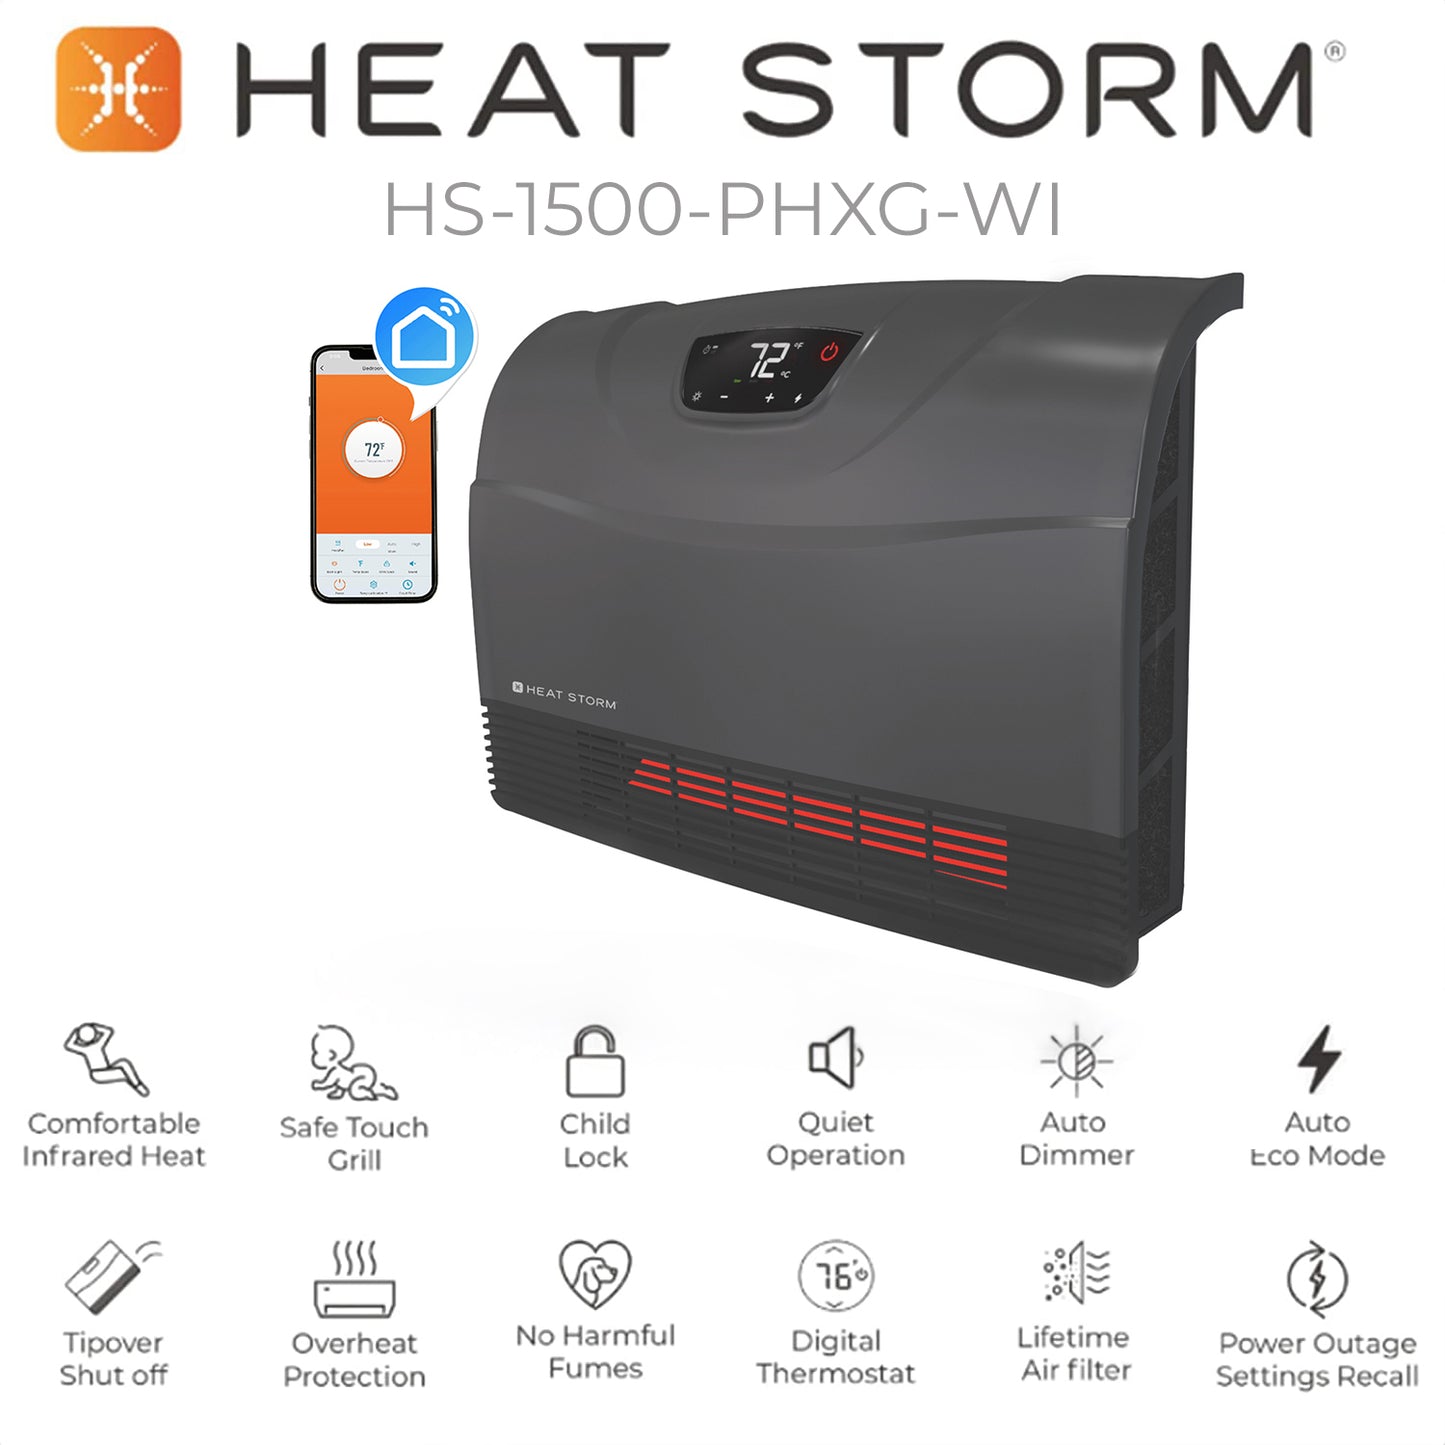 Phoenix Grey Wi-Fi features infographic: safe touch grill, child lock, quiet, auto dimmer, auto Eco mode, tipover shutoff, overheat protection, no harmful fumes, digital thermostat, washable air filter, power outage settings recall